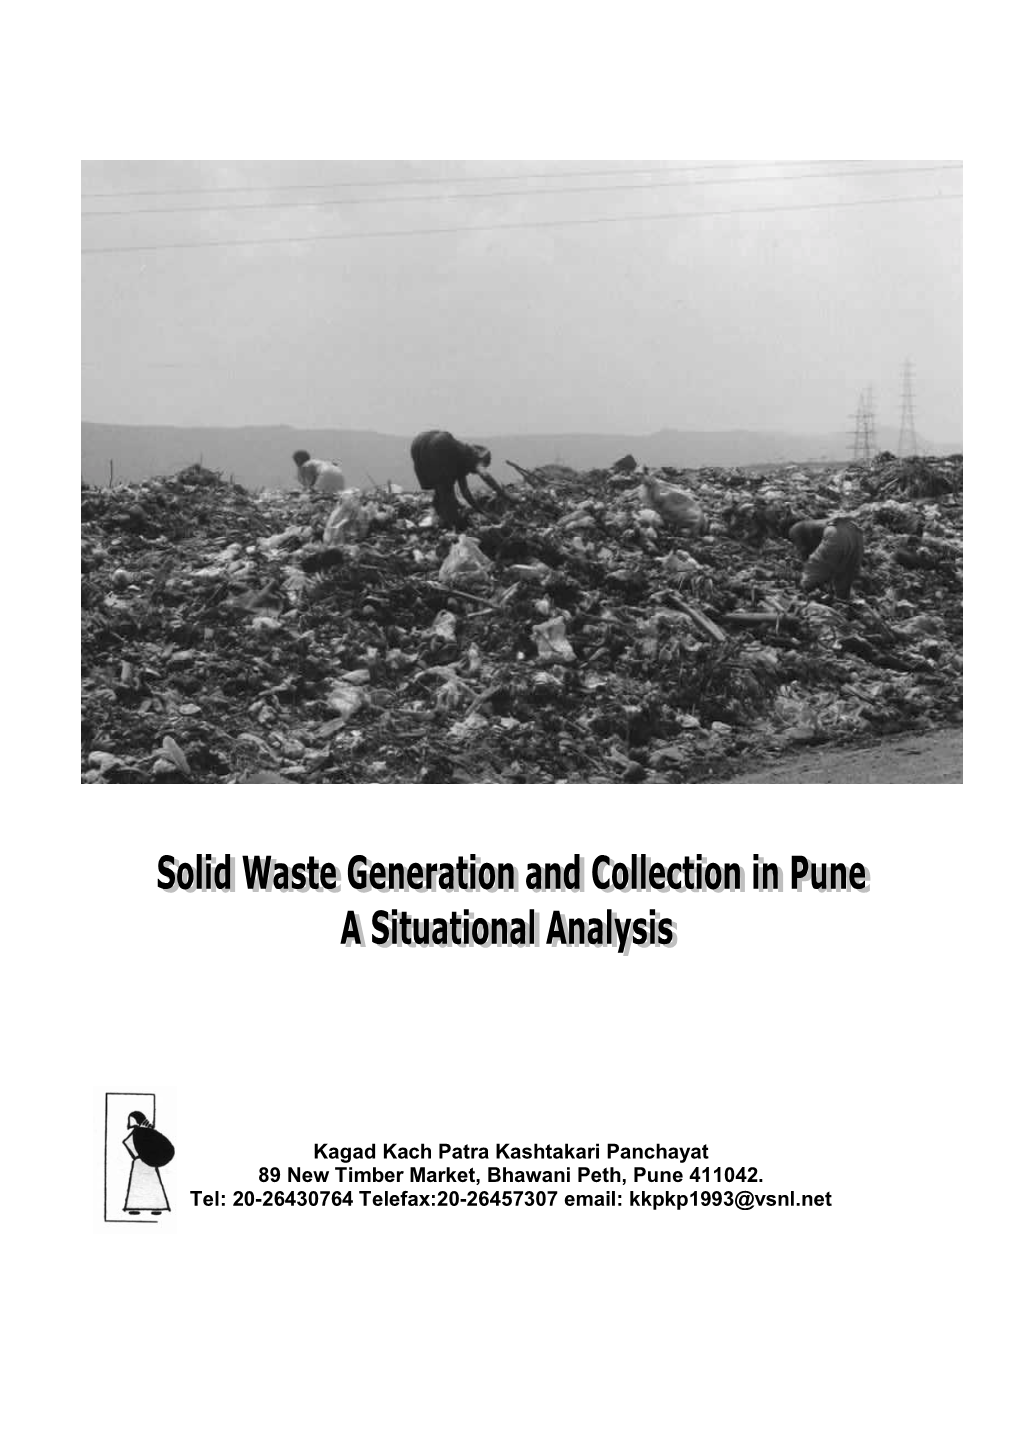 Solid Waste Generation and Collection in Pune